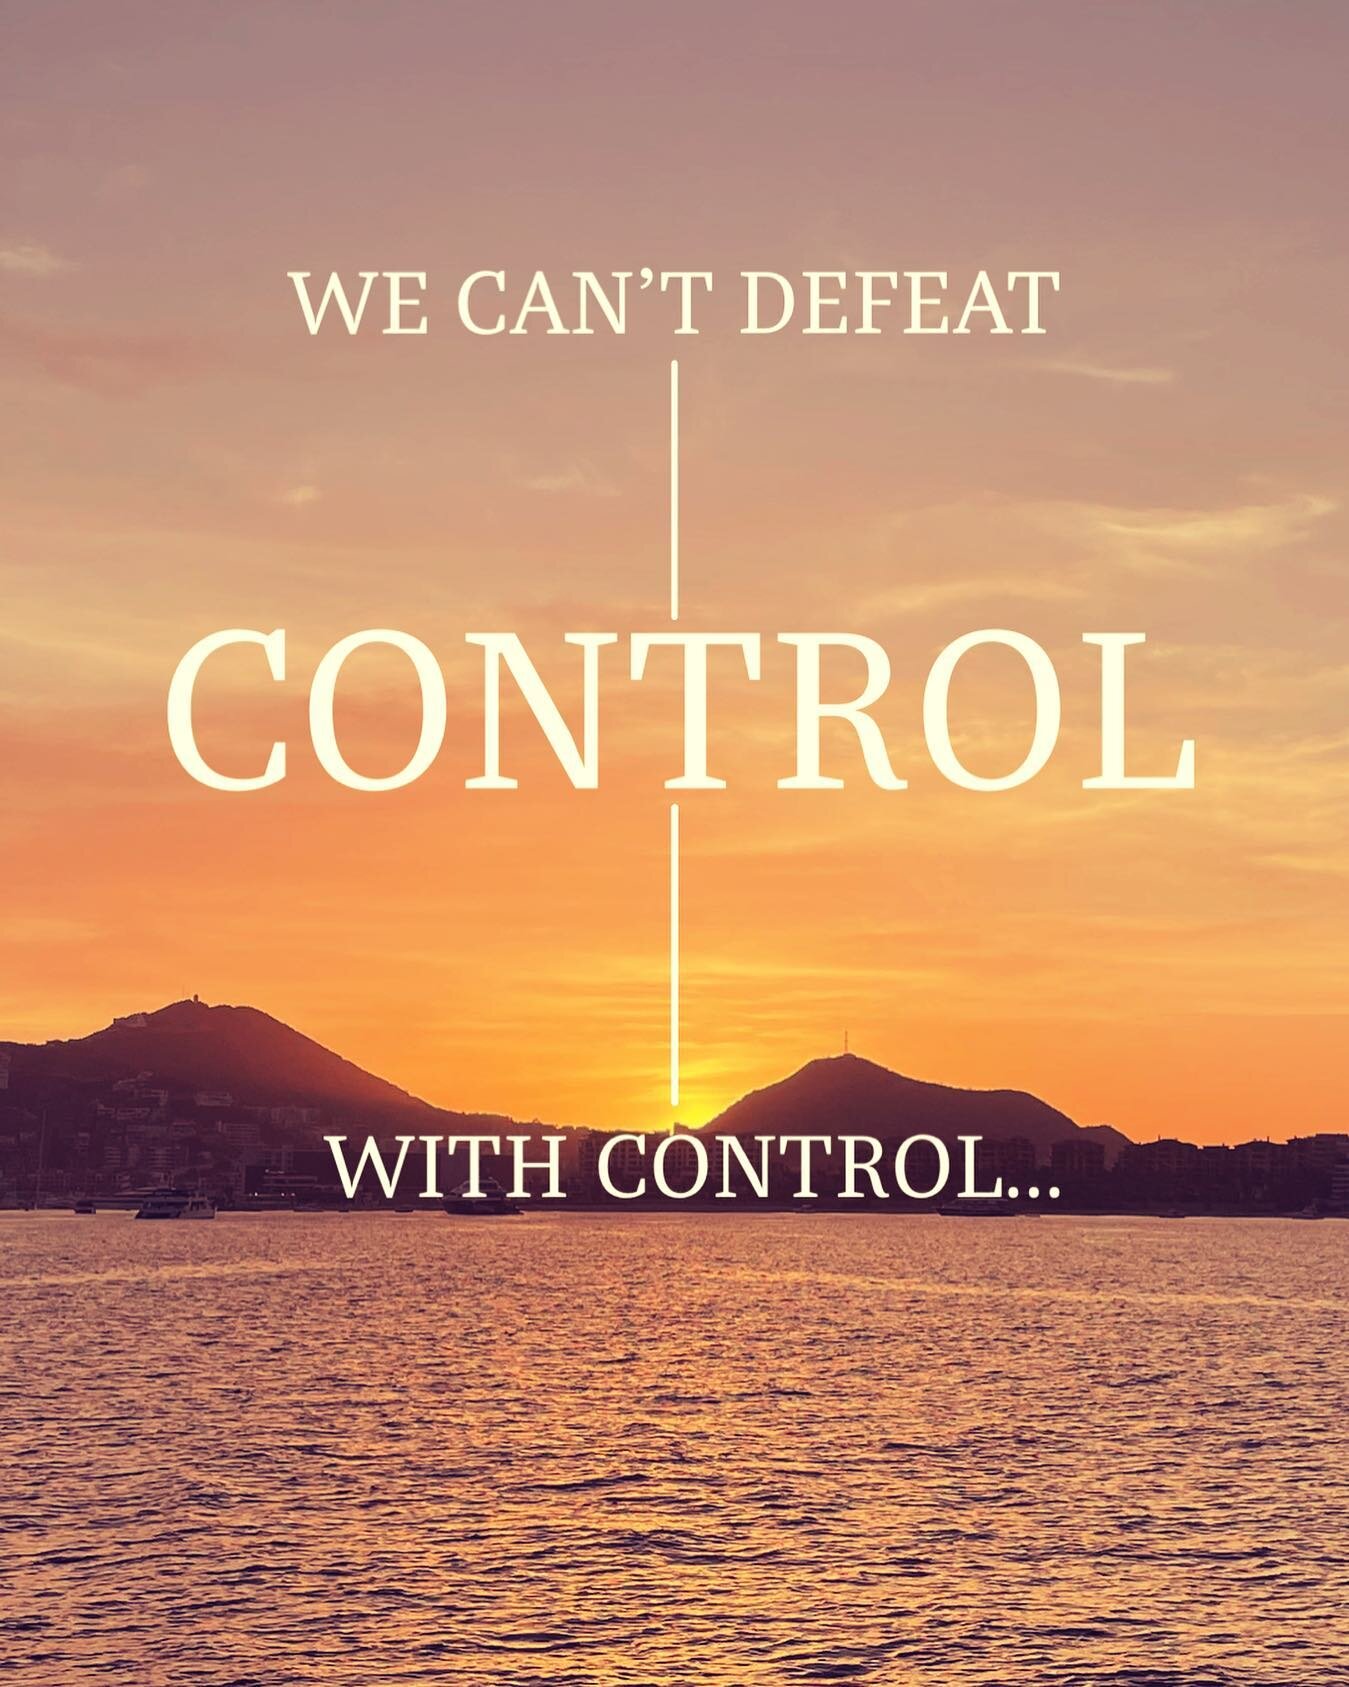 &quot;We can&rsquo;t defeat control with control. We defeat it with surrender&rdquo; -Ben Rose

So then, surrender to God. Stand up to the devil and resist him and he will flee in agony.
‭‭James 4‬:‭7‬ ‭TPT‬‬

But seek first the kingdom of God and hi